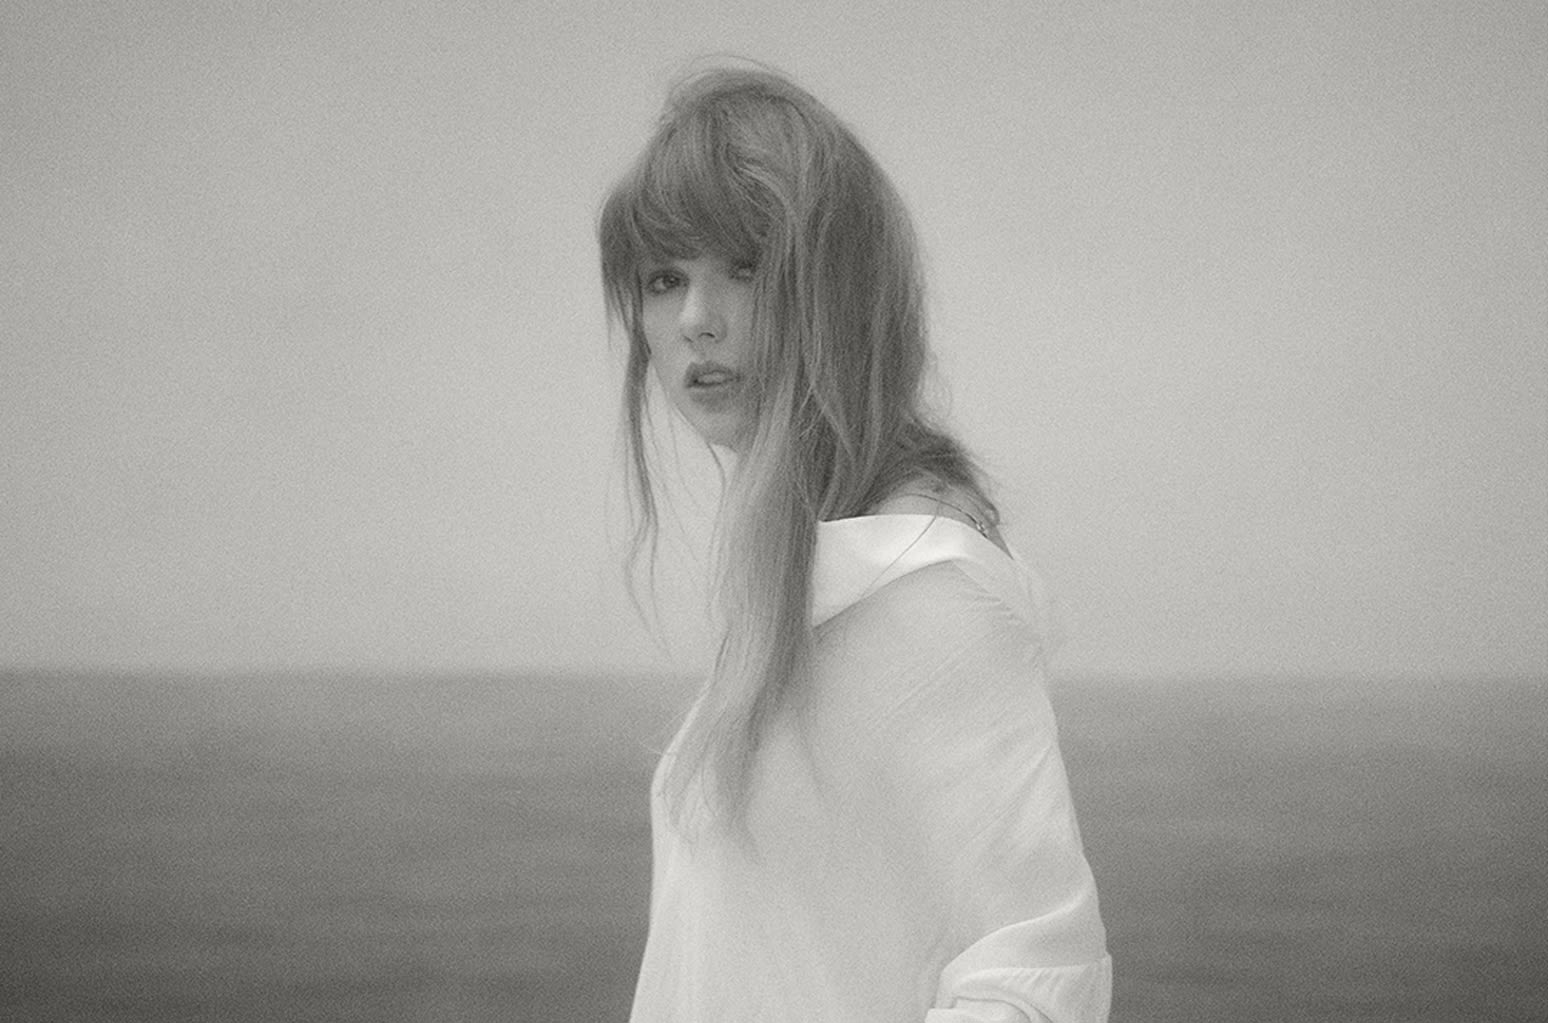 Taylor Swift Releases Limited Edition ‘Tortured Poets’ Albums Featuring First Draft Voice Memos